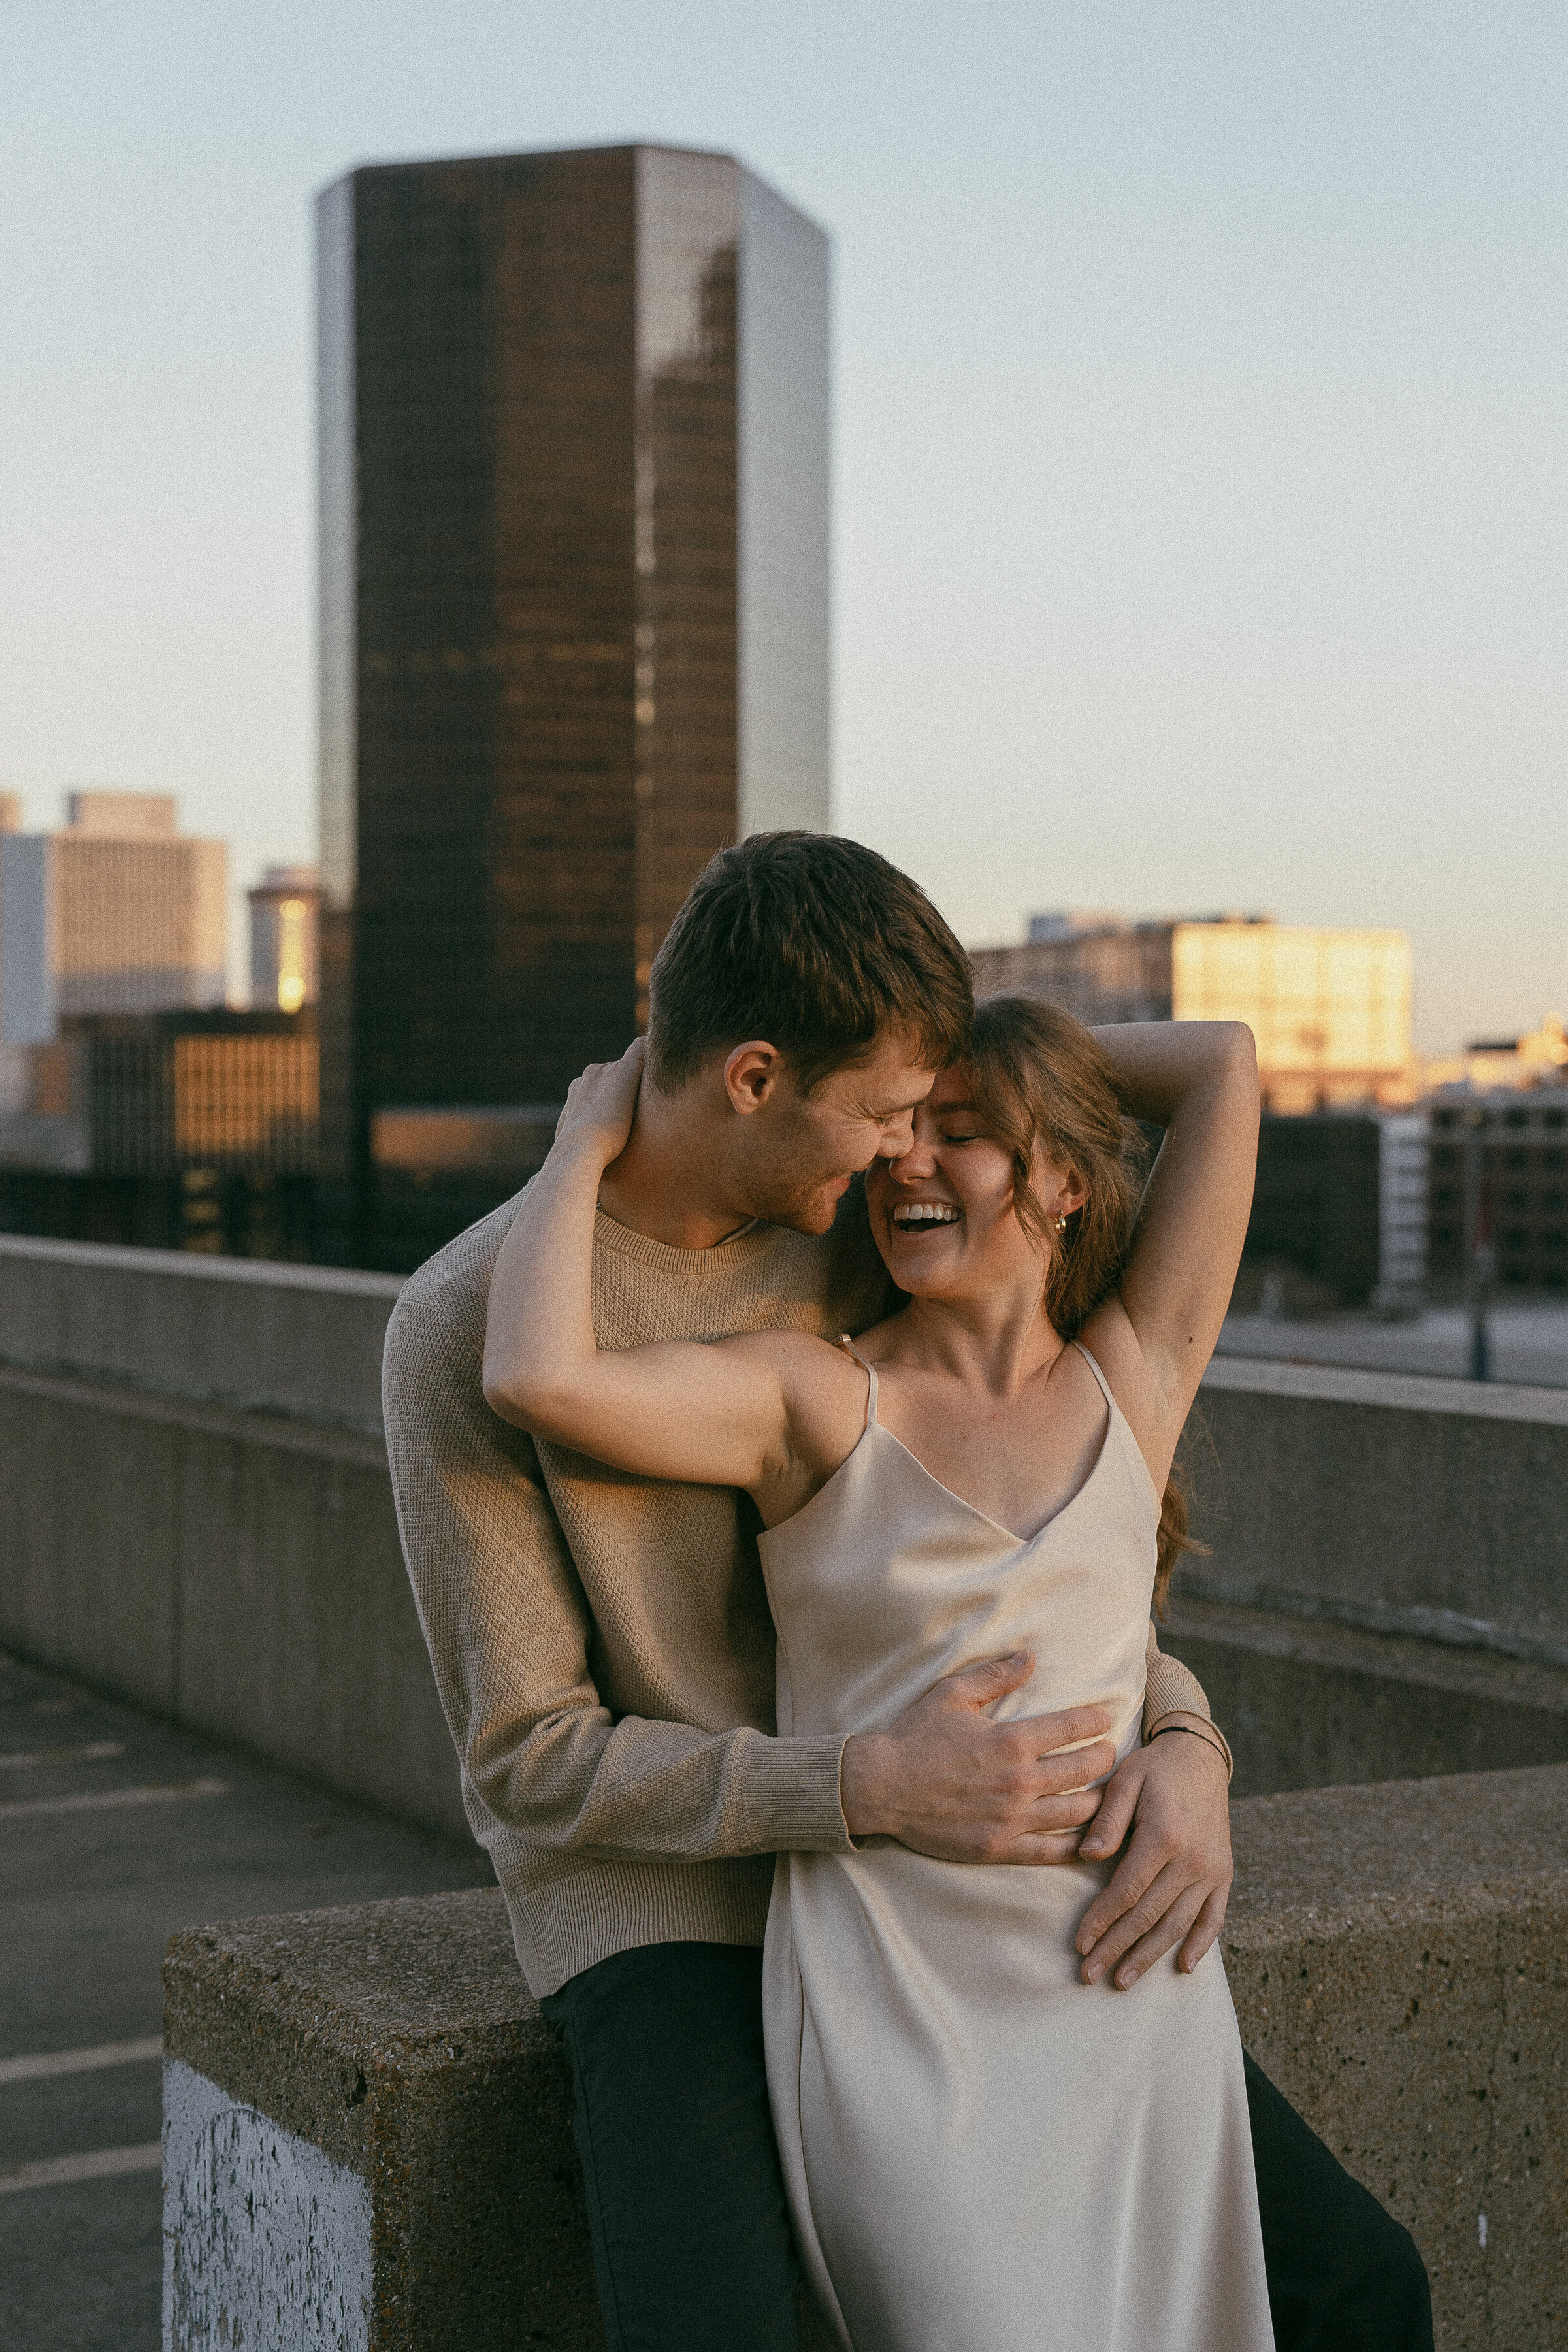 A couple embracing on a city rooftop at sunset.